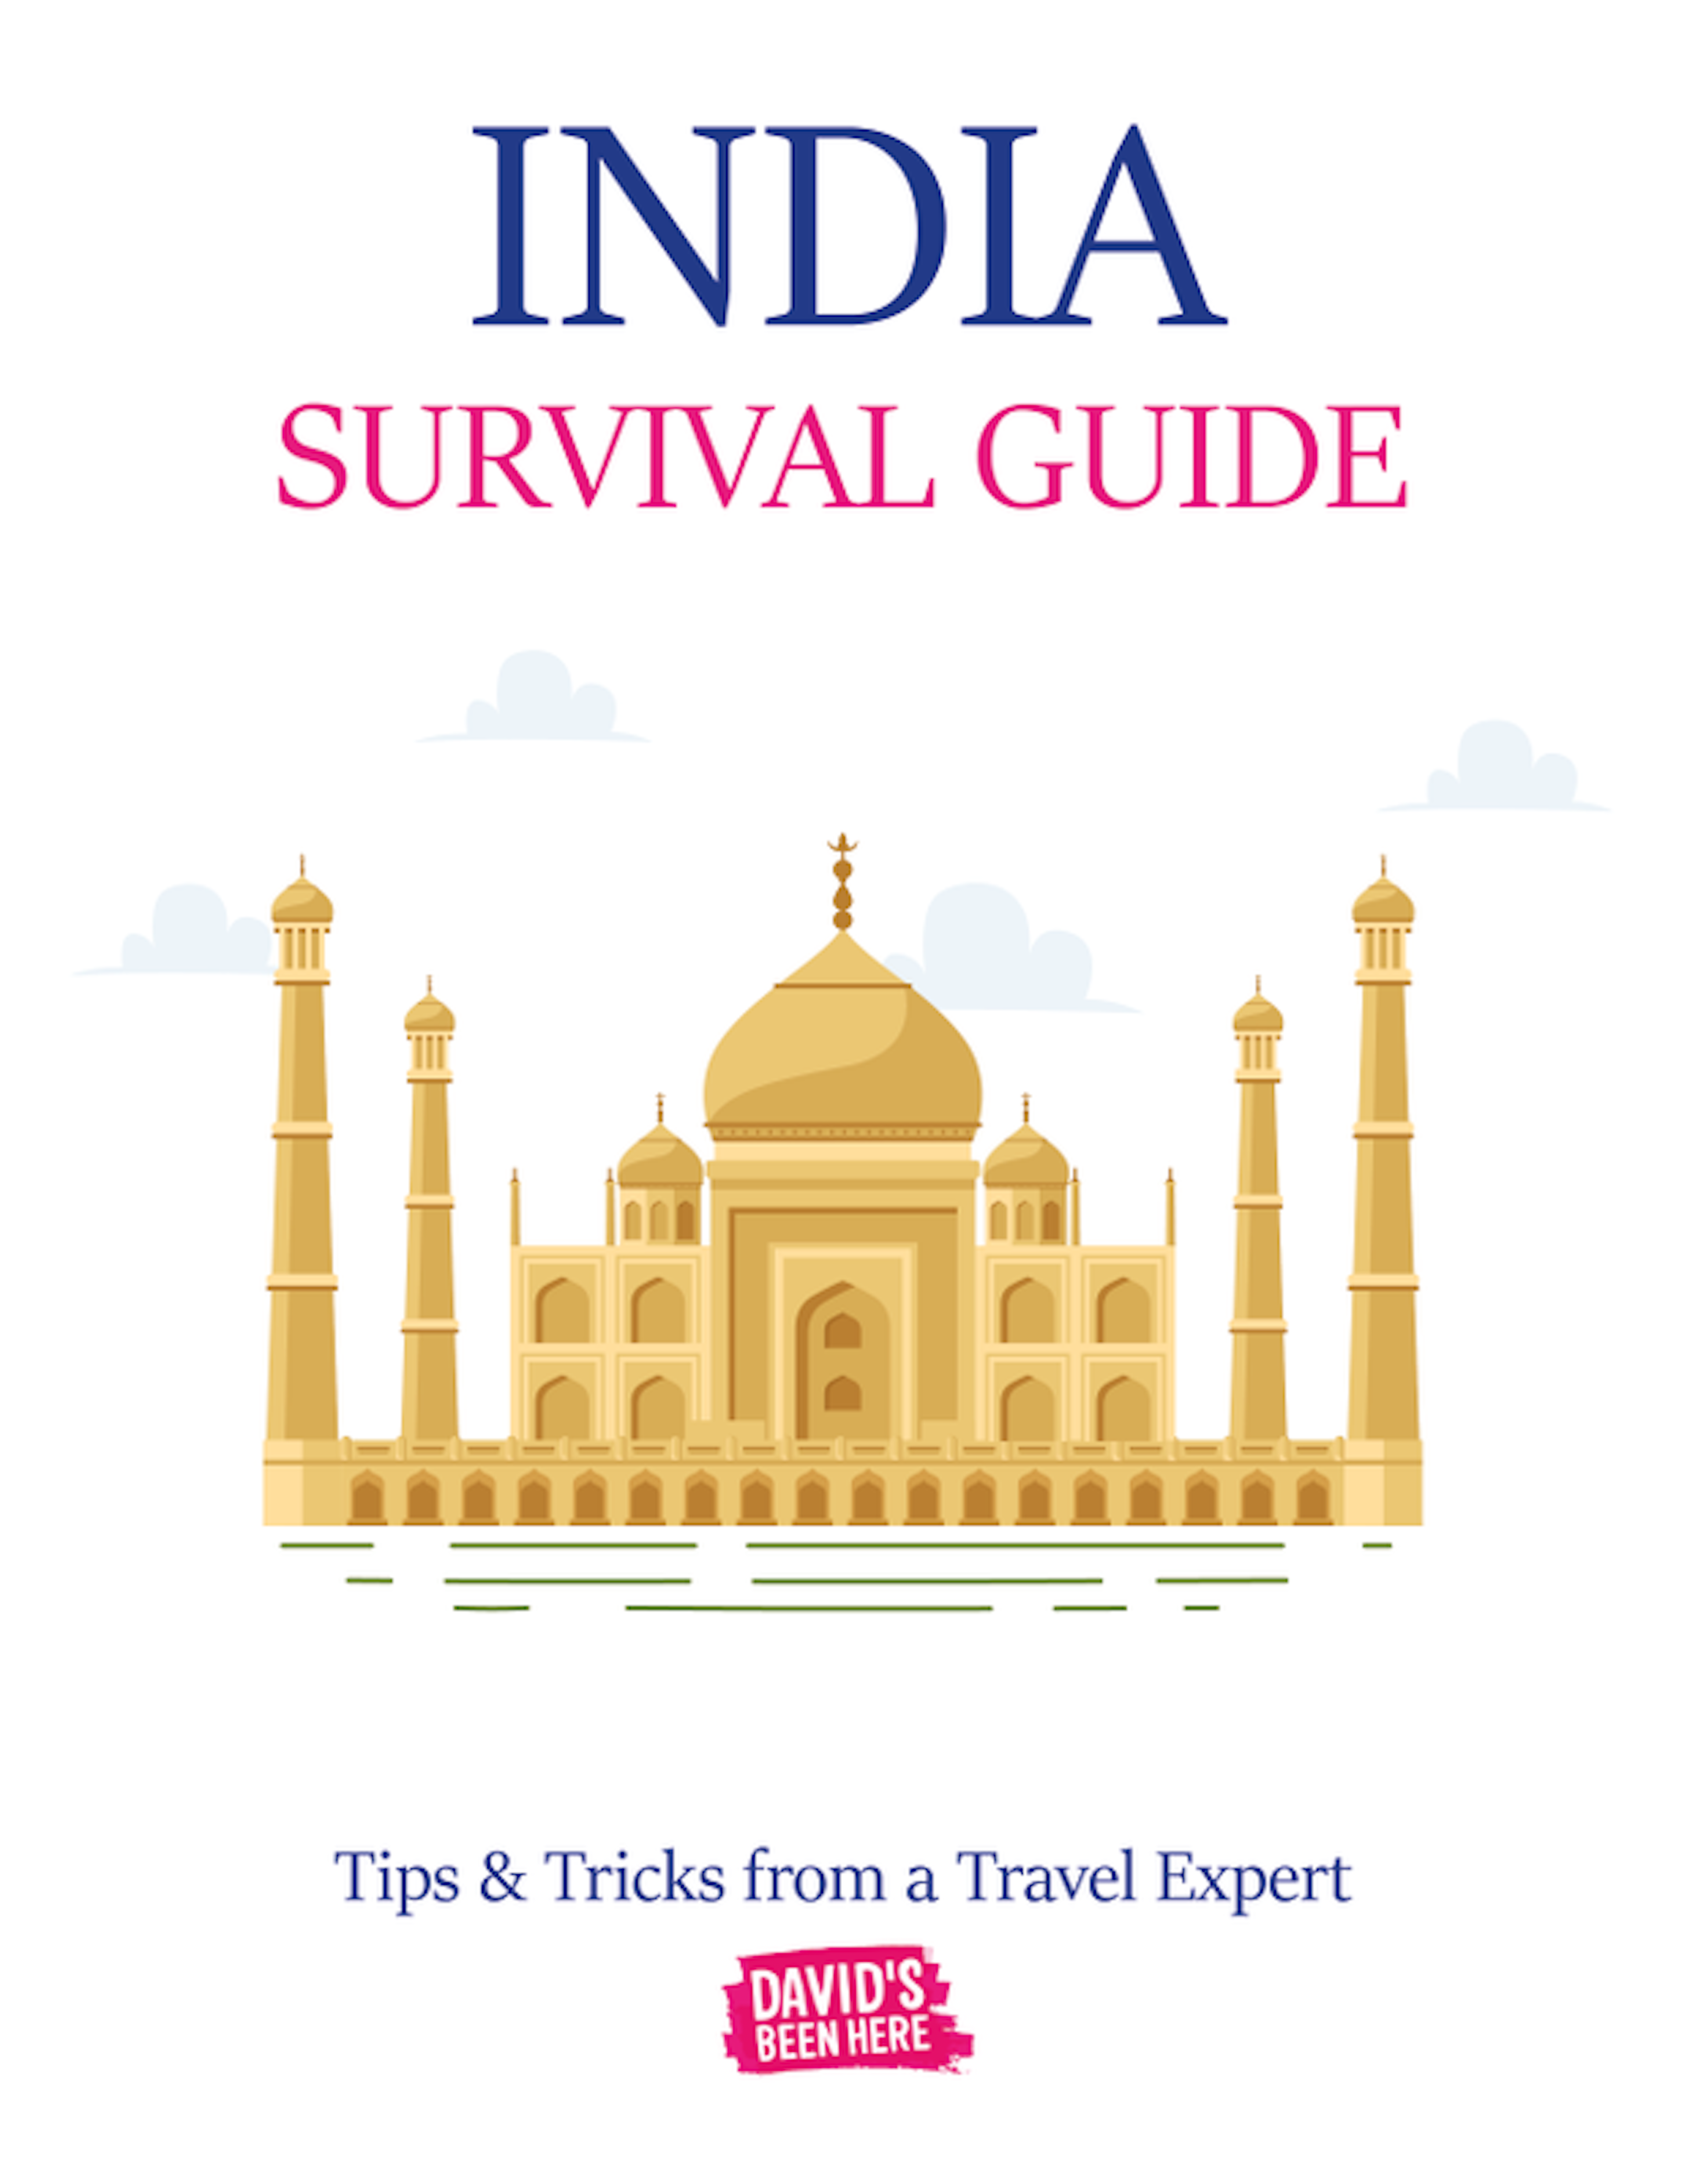 India Survival Guide - Tips & Tricks